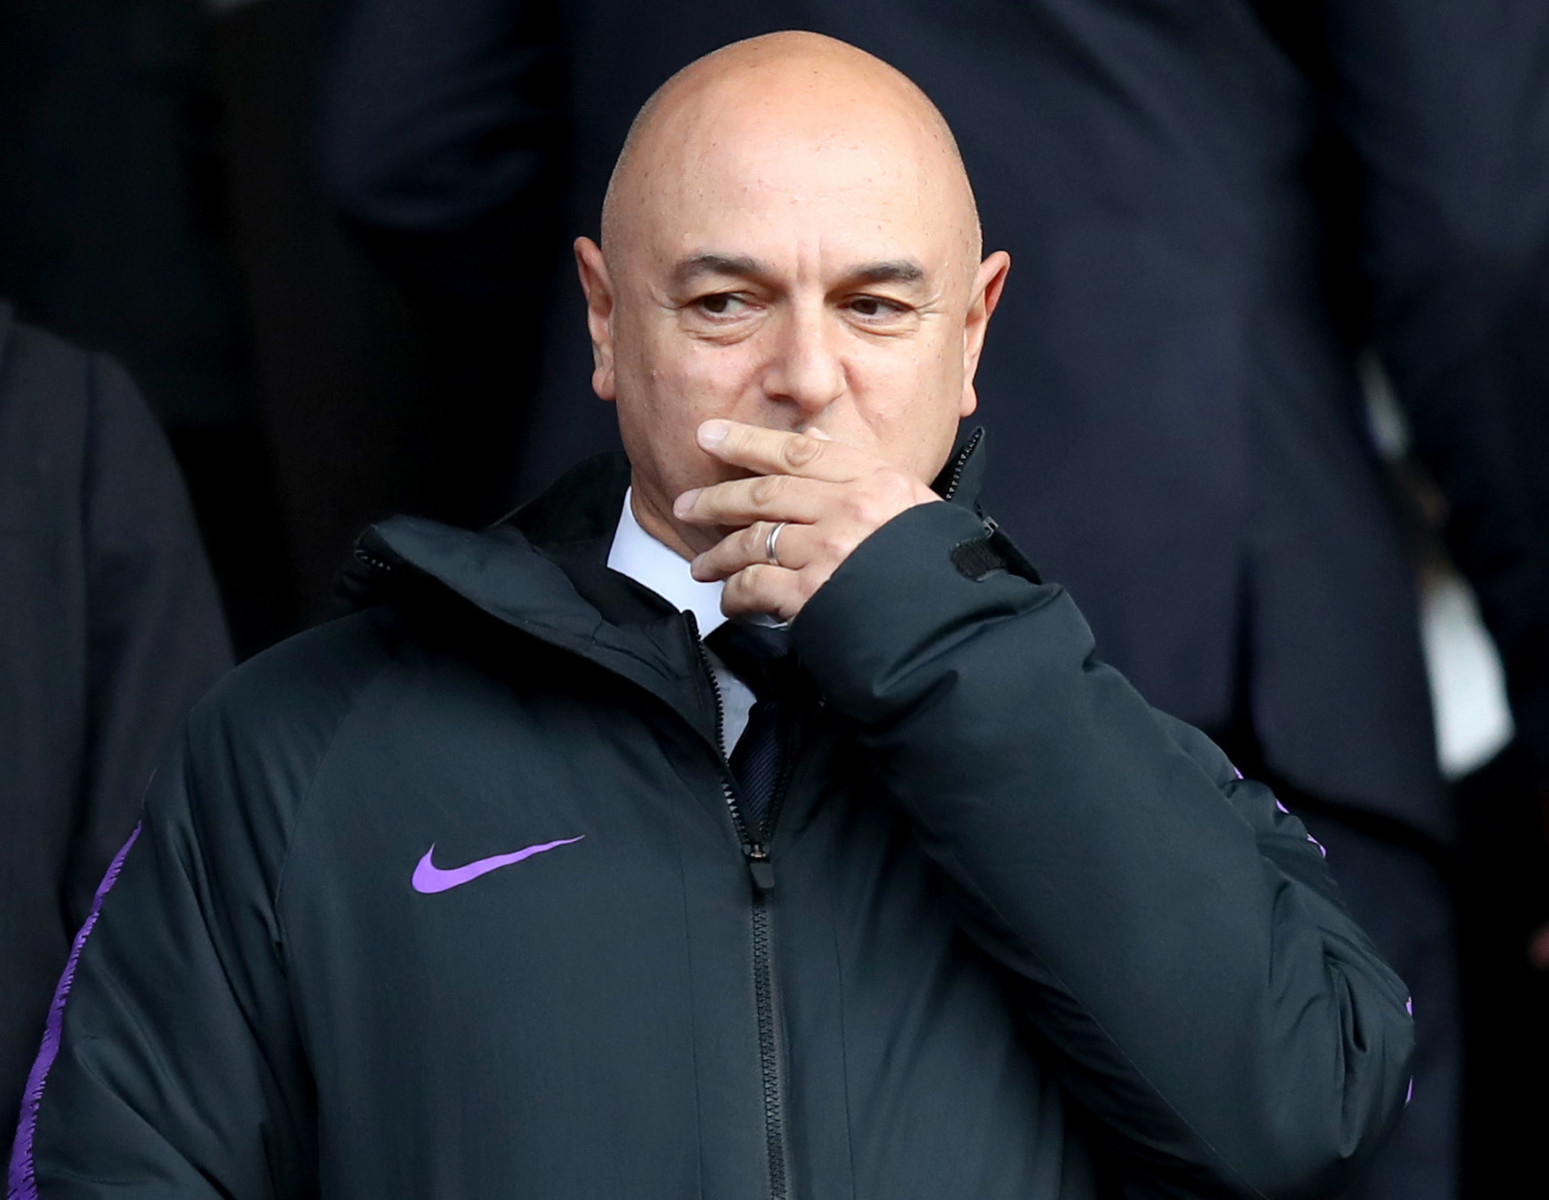 Spurs chairman Daniel Levy endured the wrath of fans when he furloughed staff and would no doubt be criticised again for selling Kane